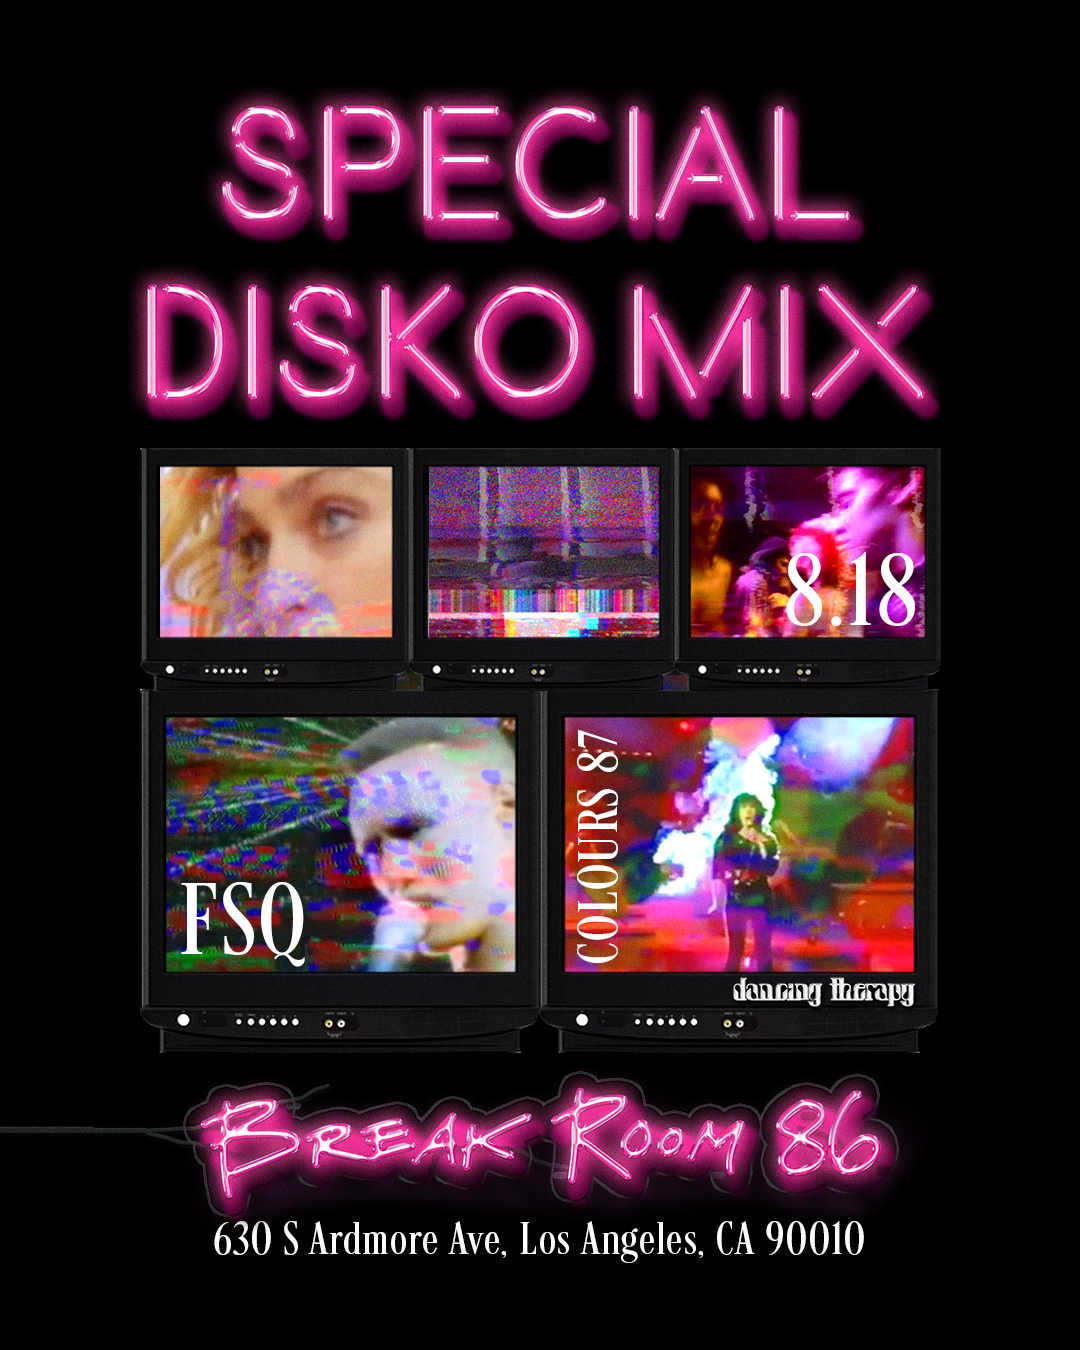 DANCING THERAPY: SPECIAL DISKO MIX (80's Edition) - フライヤー裏